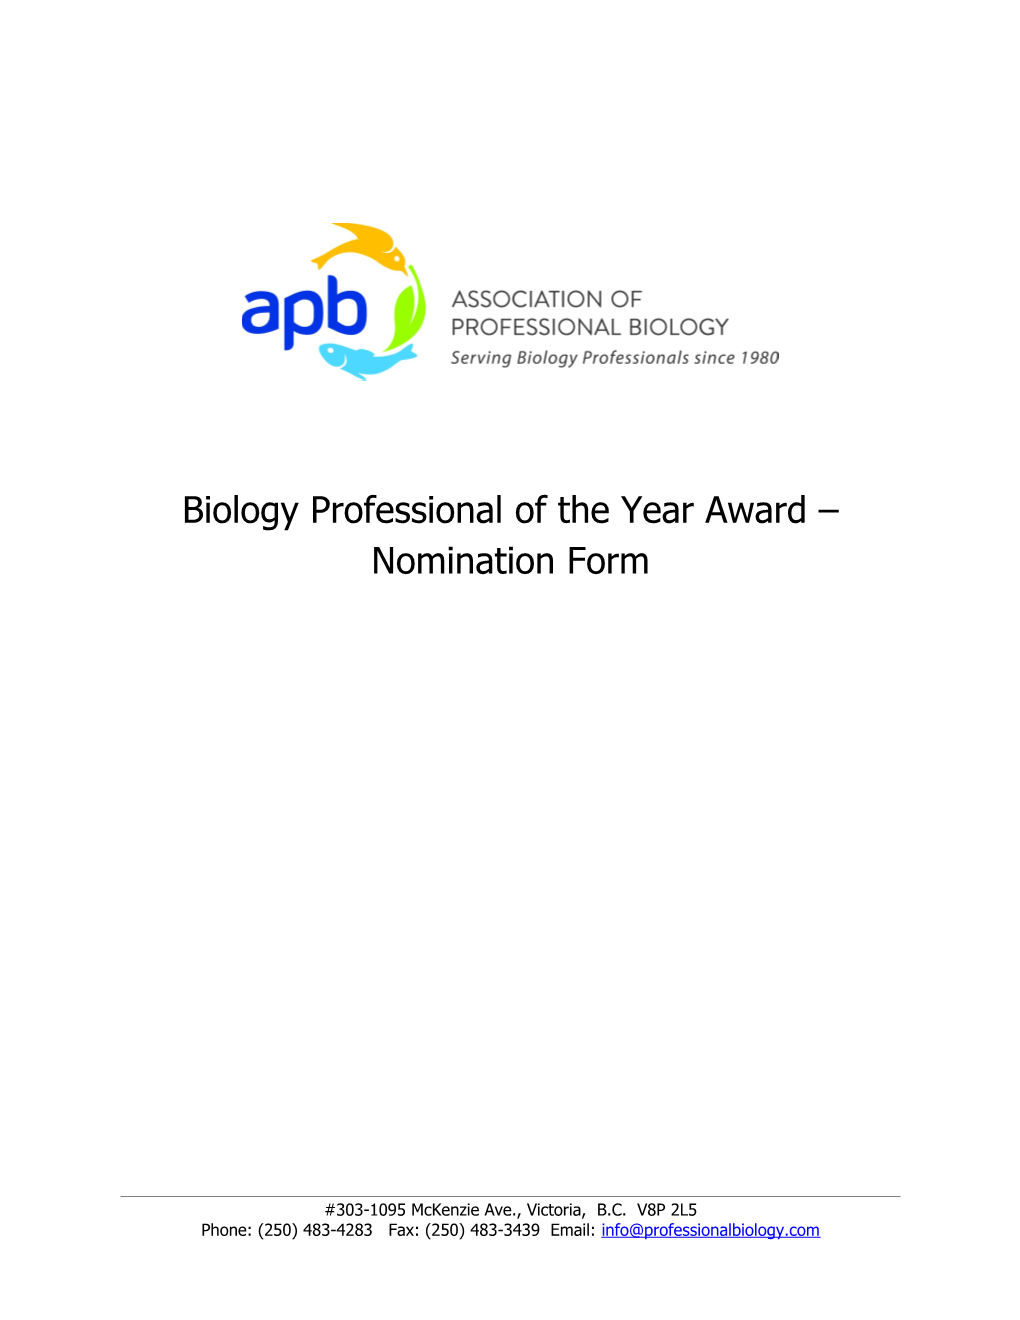 Biology Professional of the Year Award Nomination Form